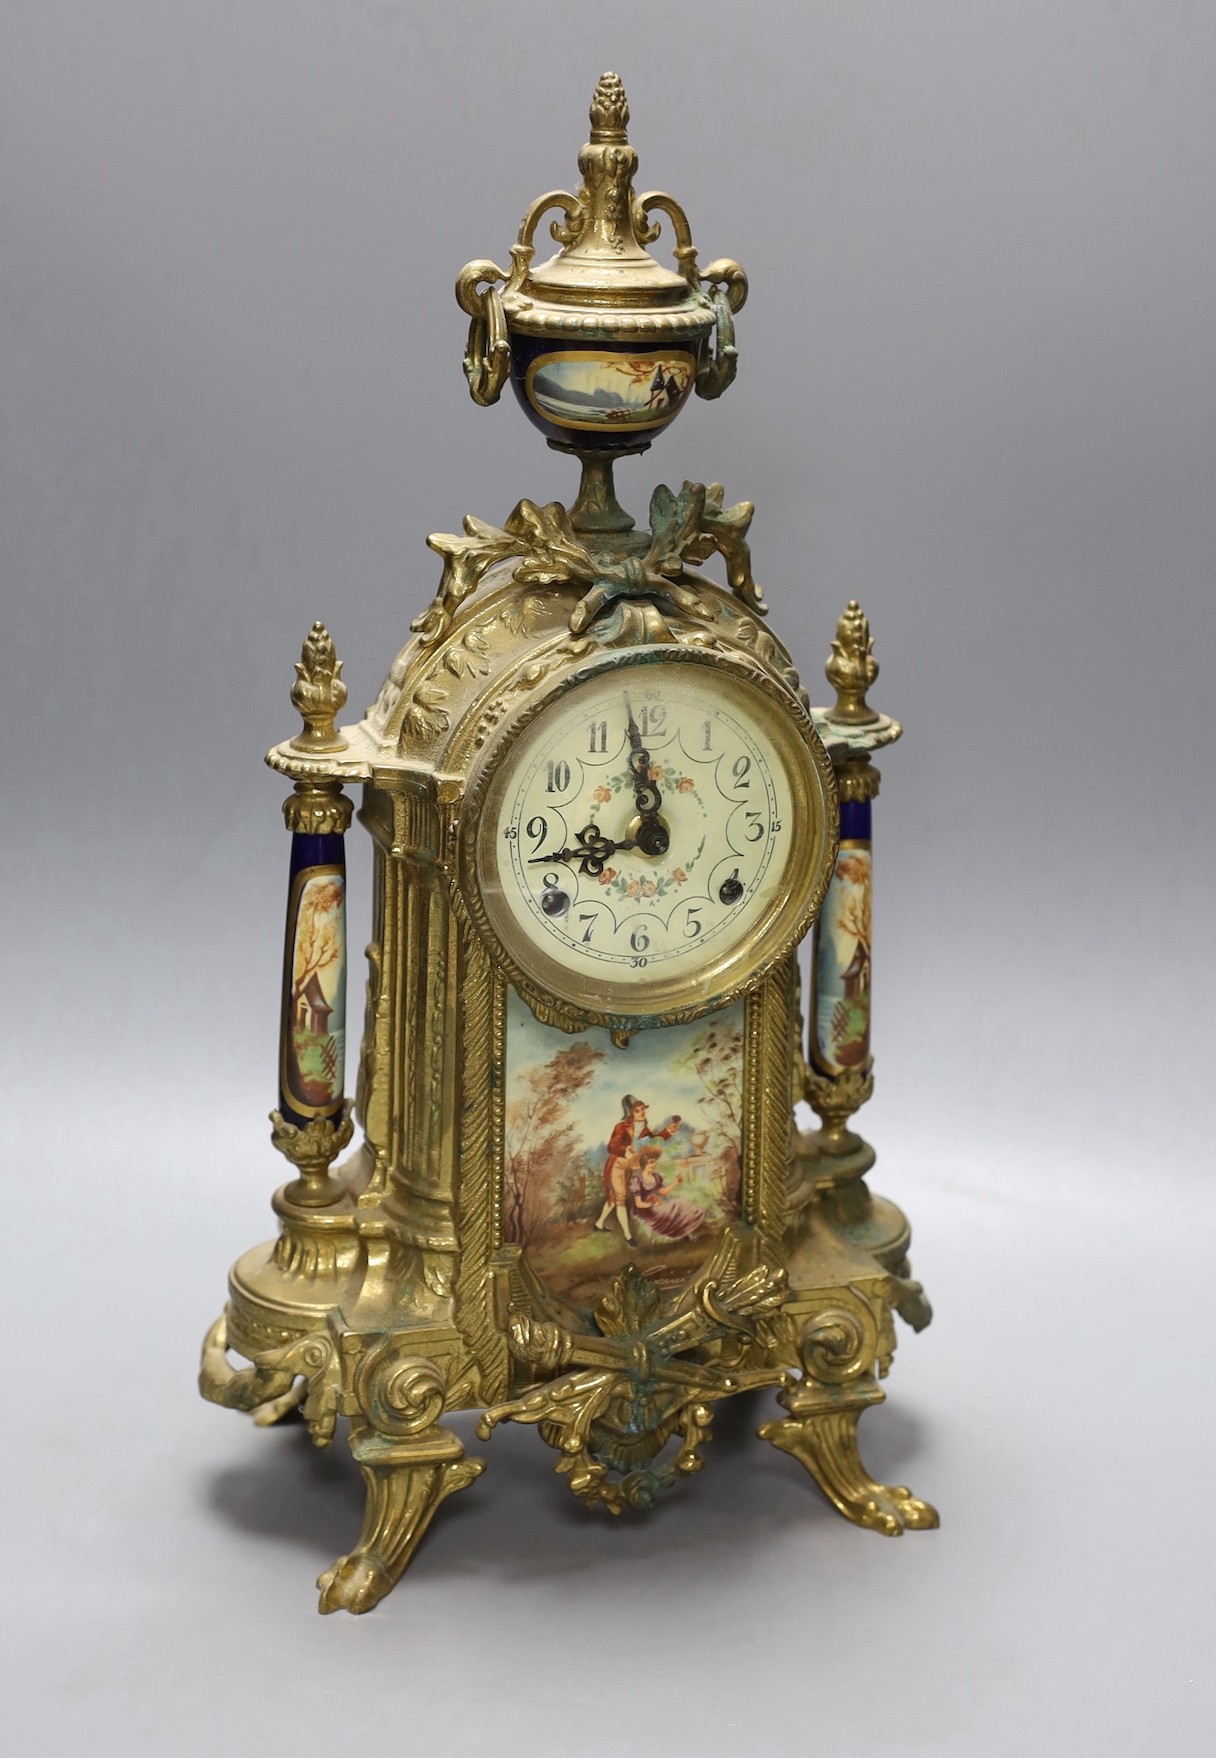 A ornamental gilt French mantel clock with painted porcelain insets - 41.5cm tall                                                                                                                                           